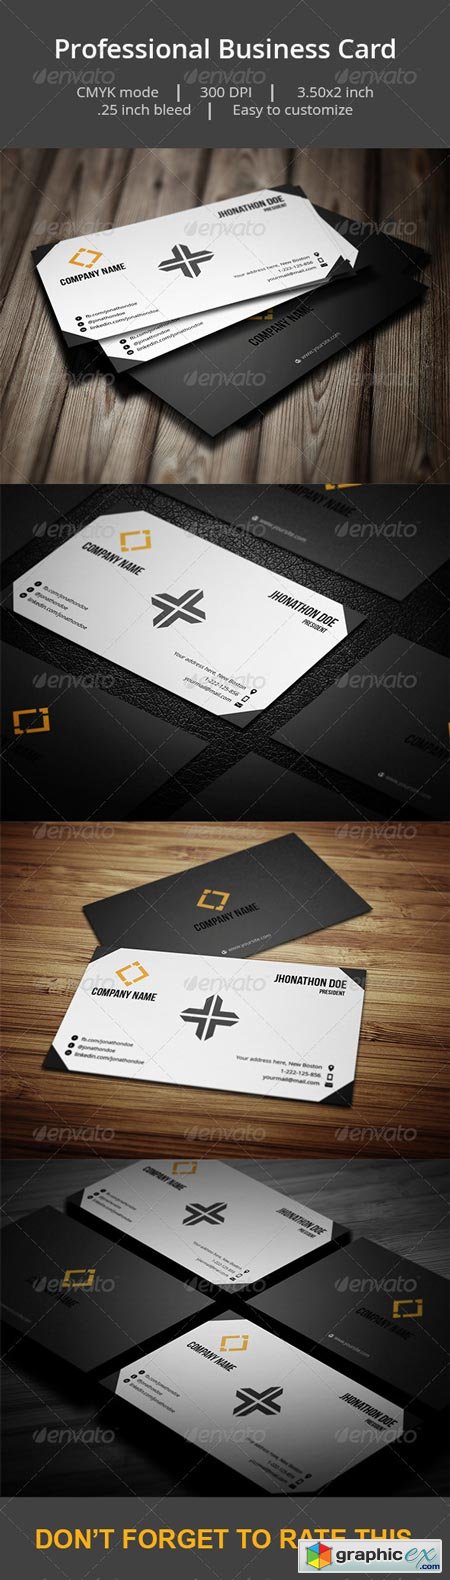 Professional Business card 6951771